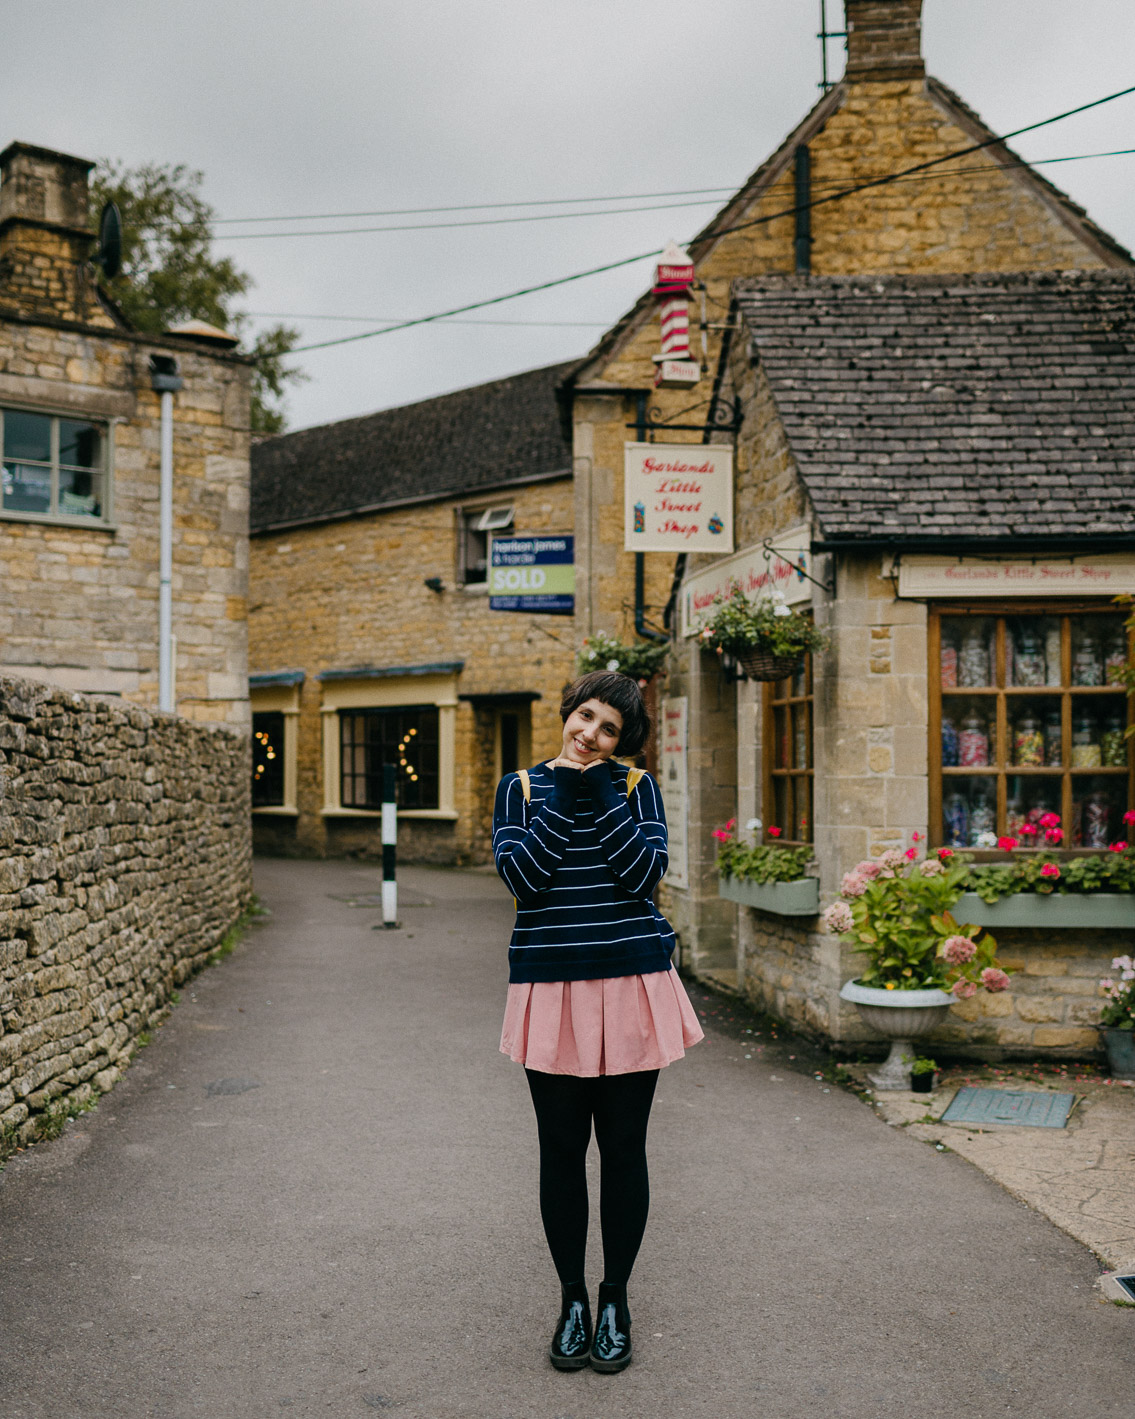 Bourton on the water - The cat, you and us